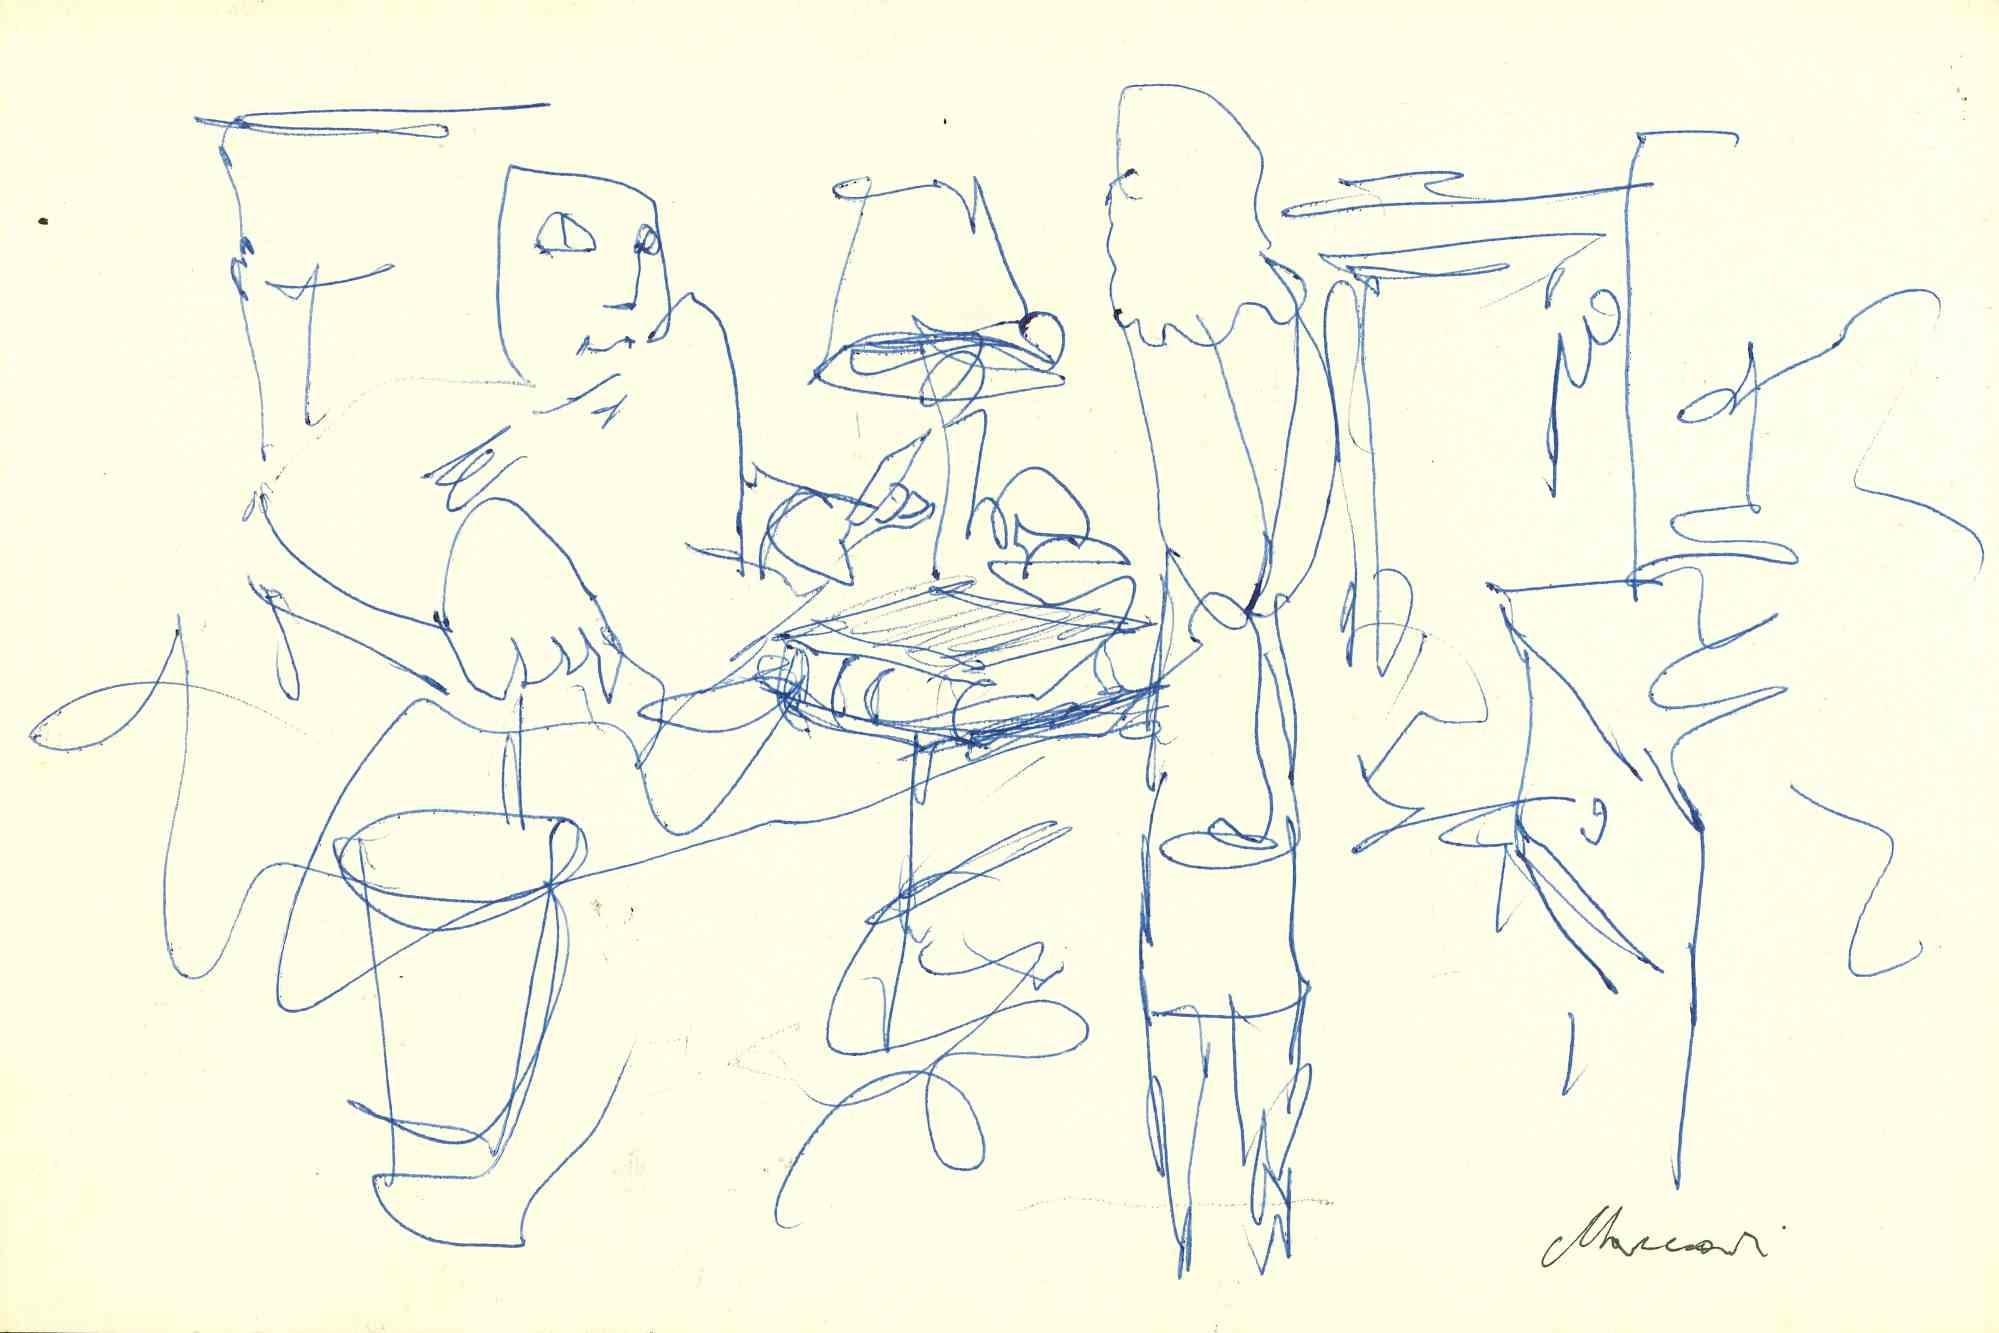 The Office is a pen Drawing realized by Mino Maccari  (1924-1989) in the 1950s.

Hand-signed on the lower margin.

Good condition.

Mino Maccari (Siena, 1924-Rome, June 16, 1989) was an Italian writer, painter, engraver and journalist, winner of the